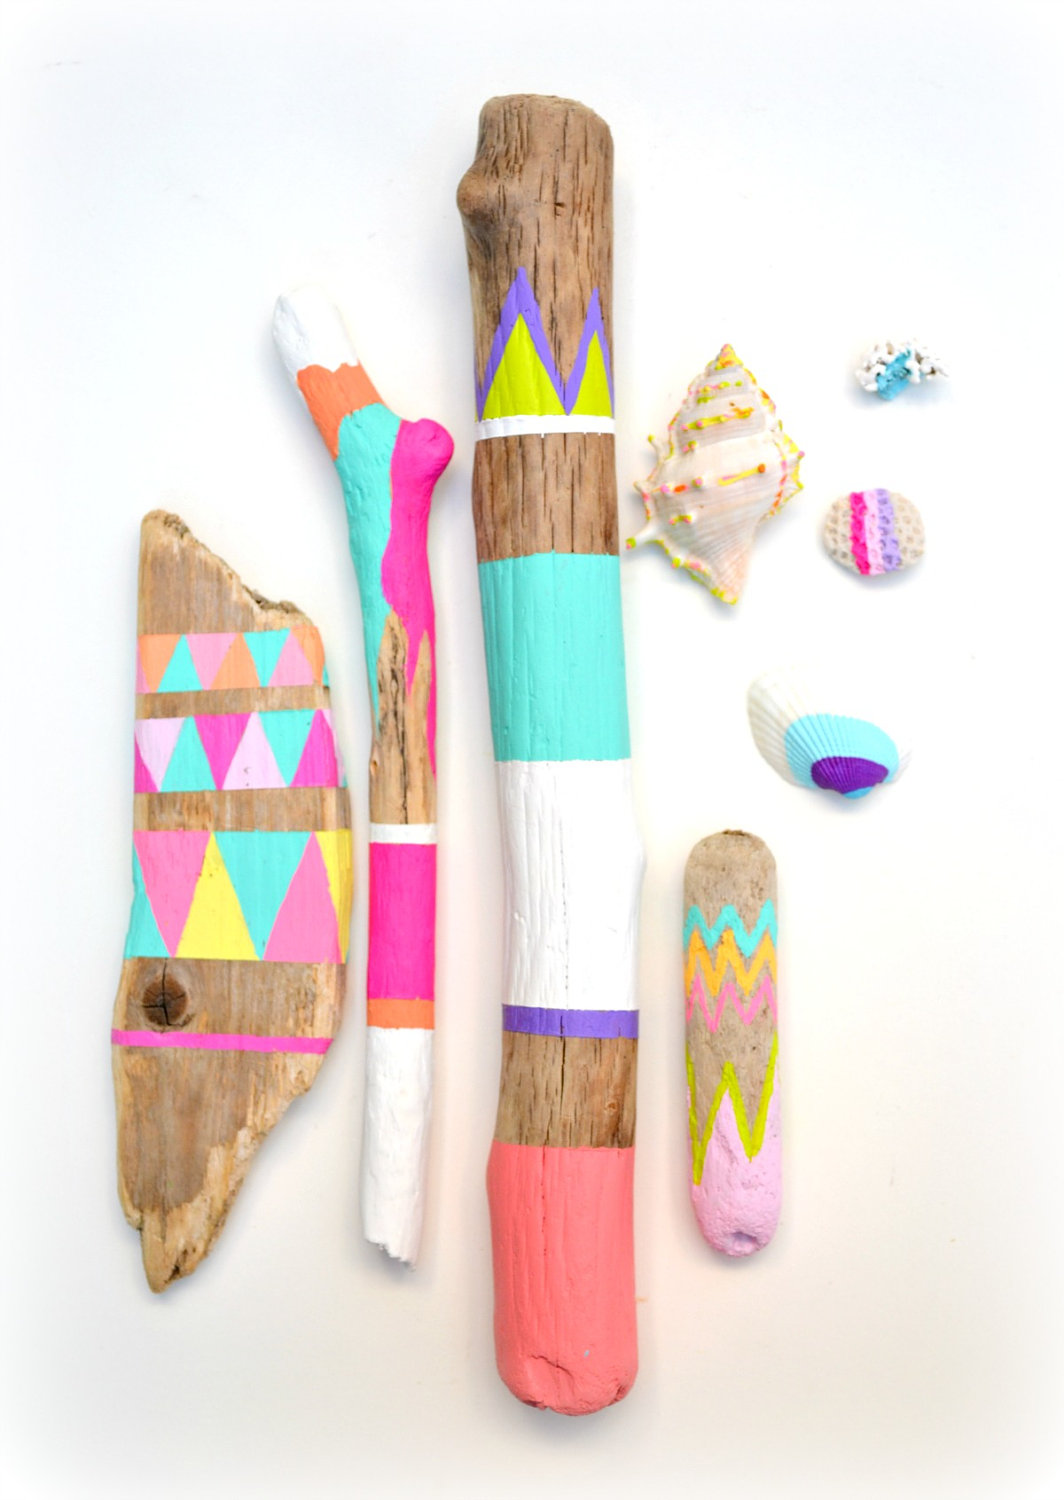 Painted sticks and seashells collection via Bonjour Frenchie